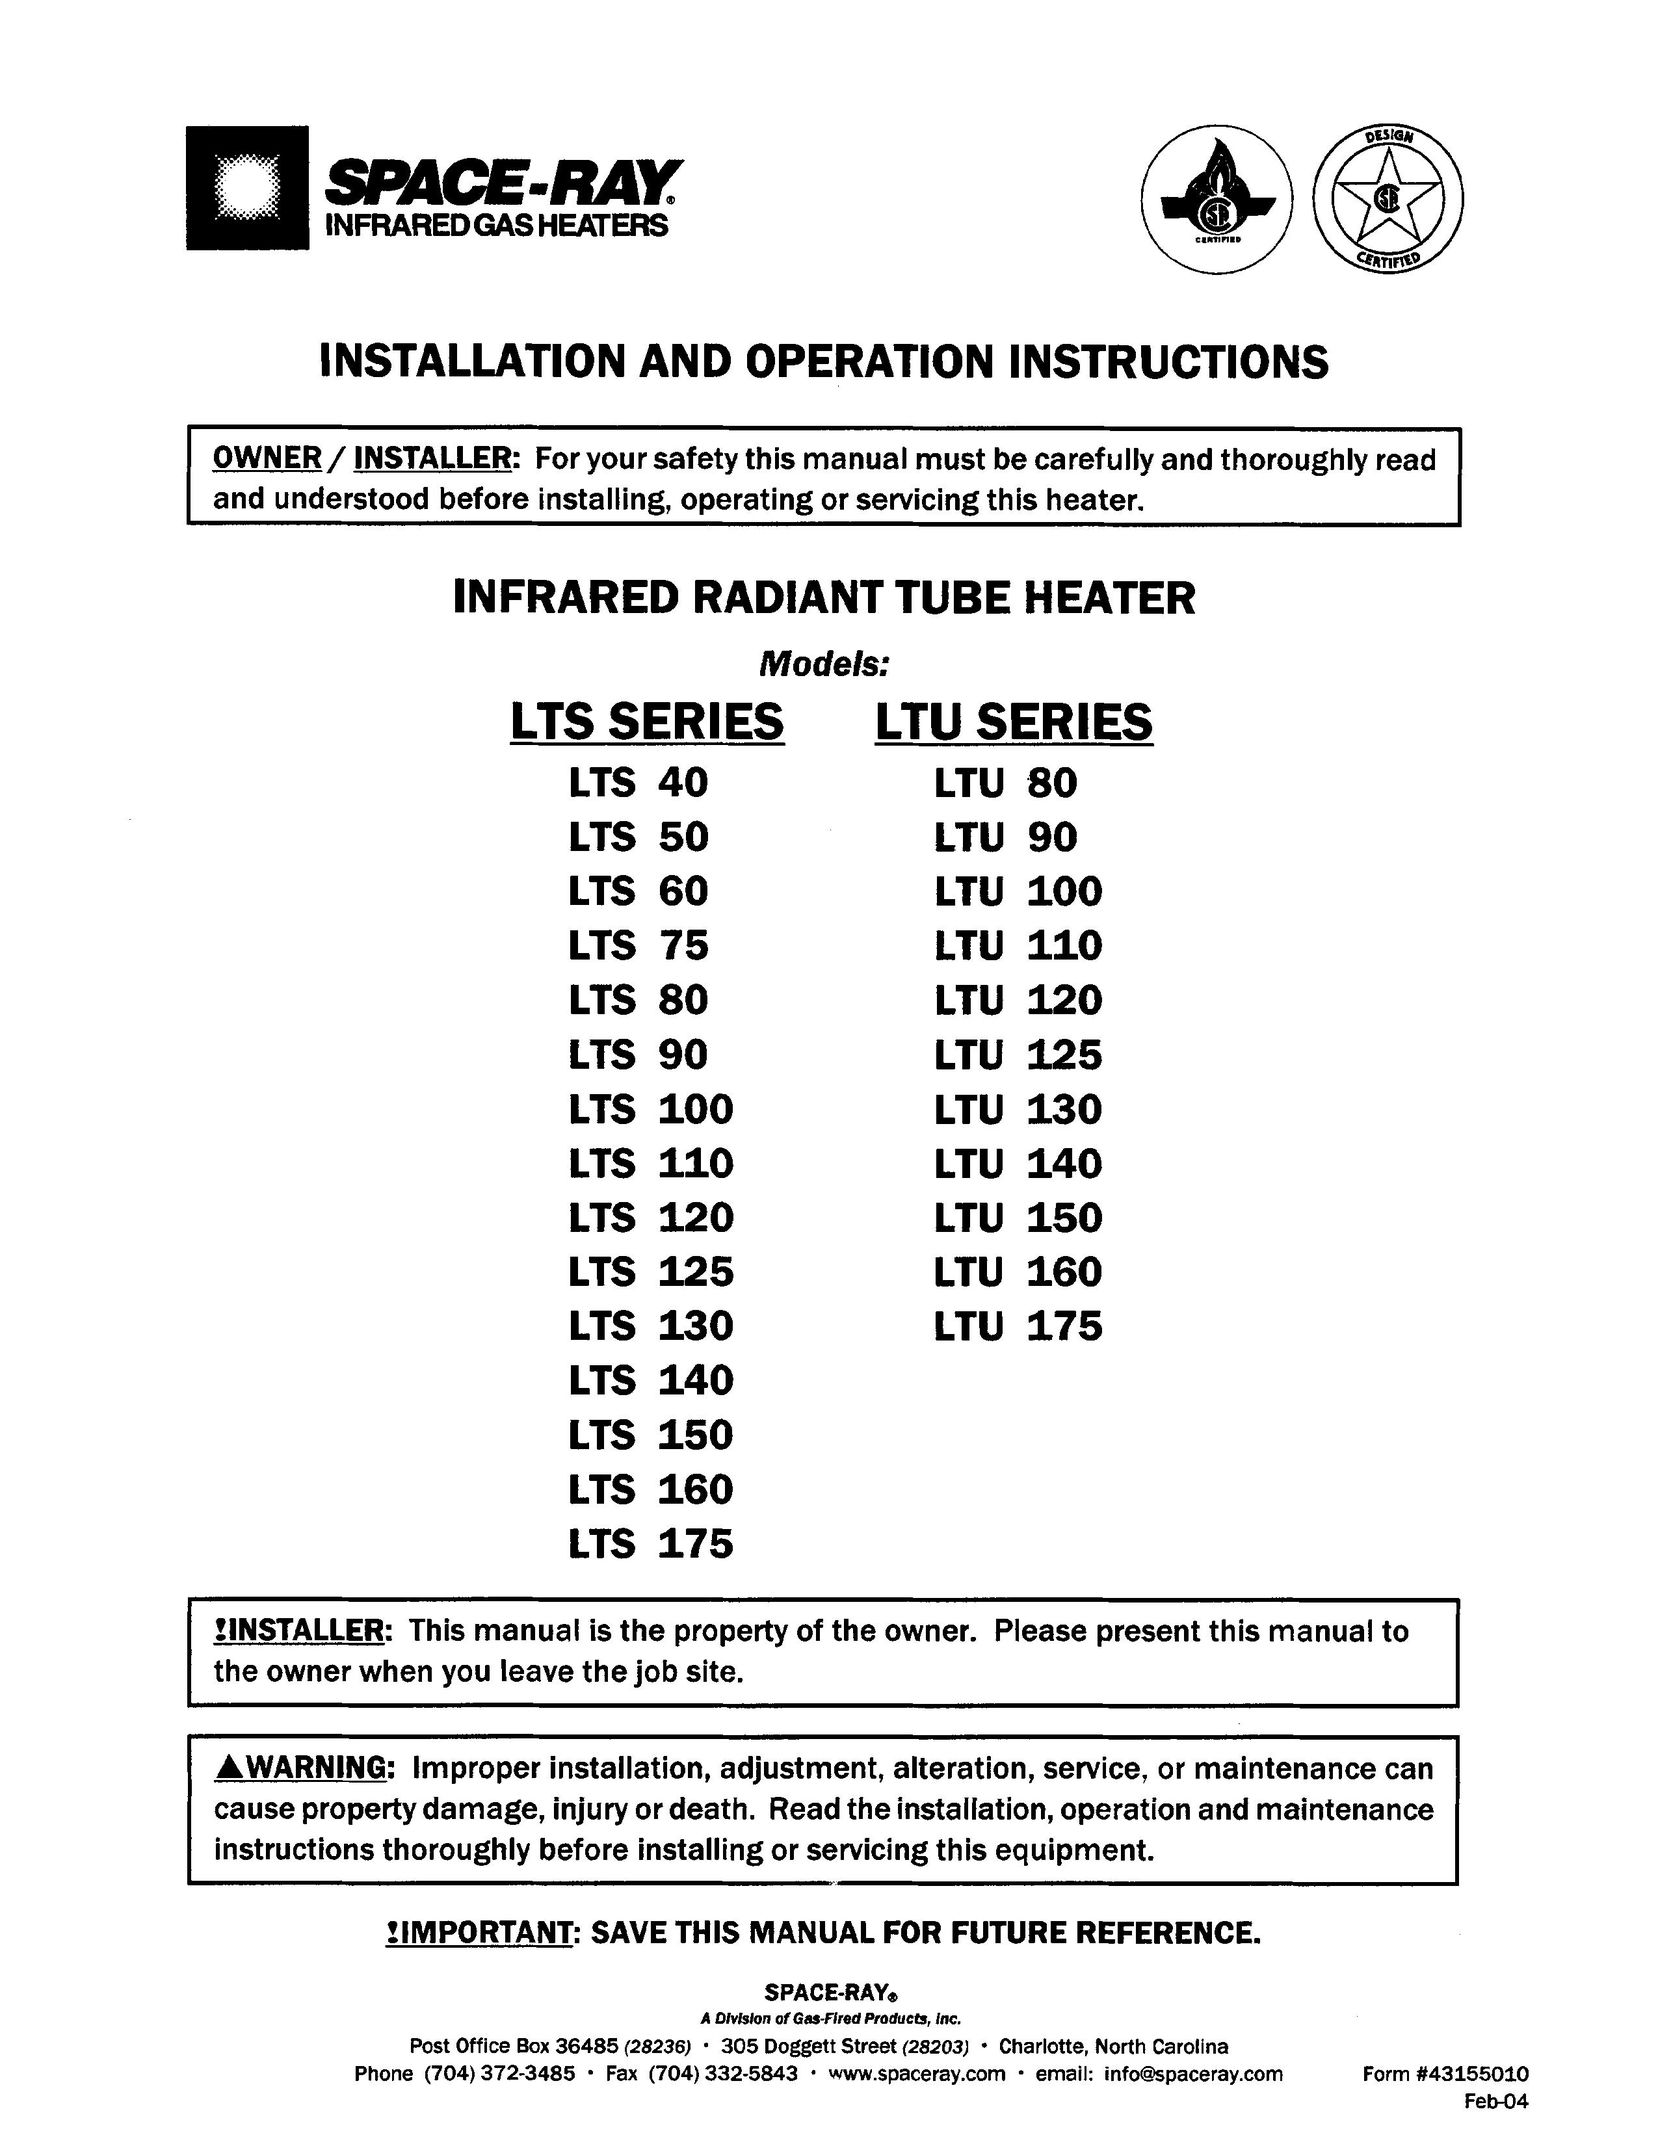 Gas-Fired Products LTU 140 Electric Heater User Manual